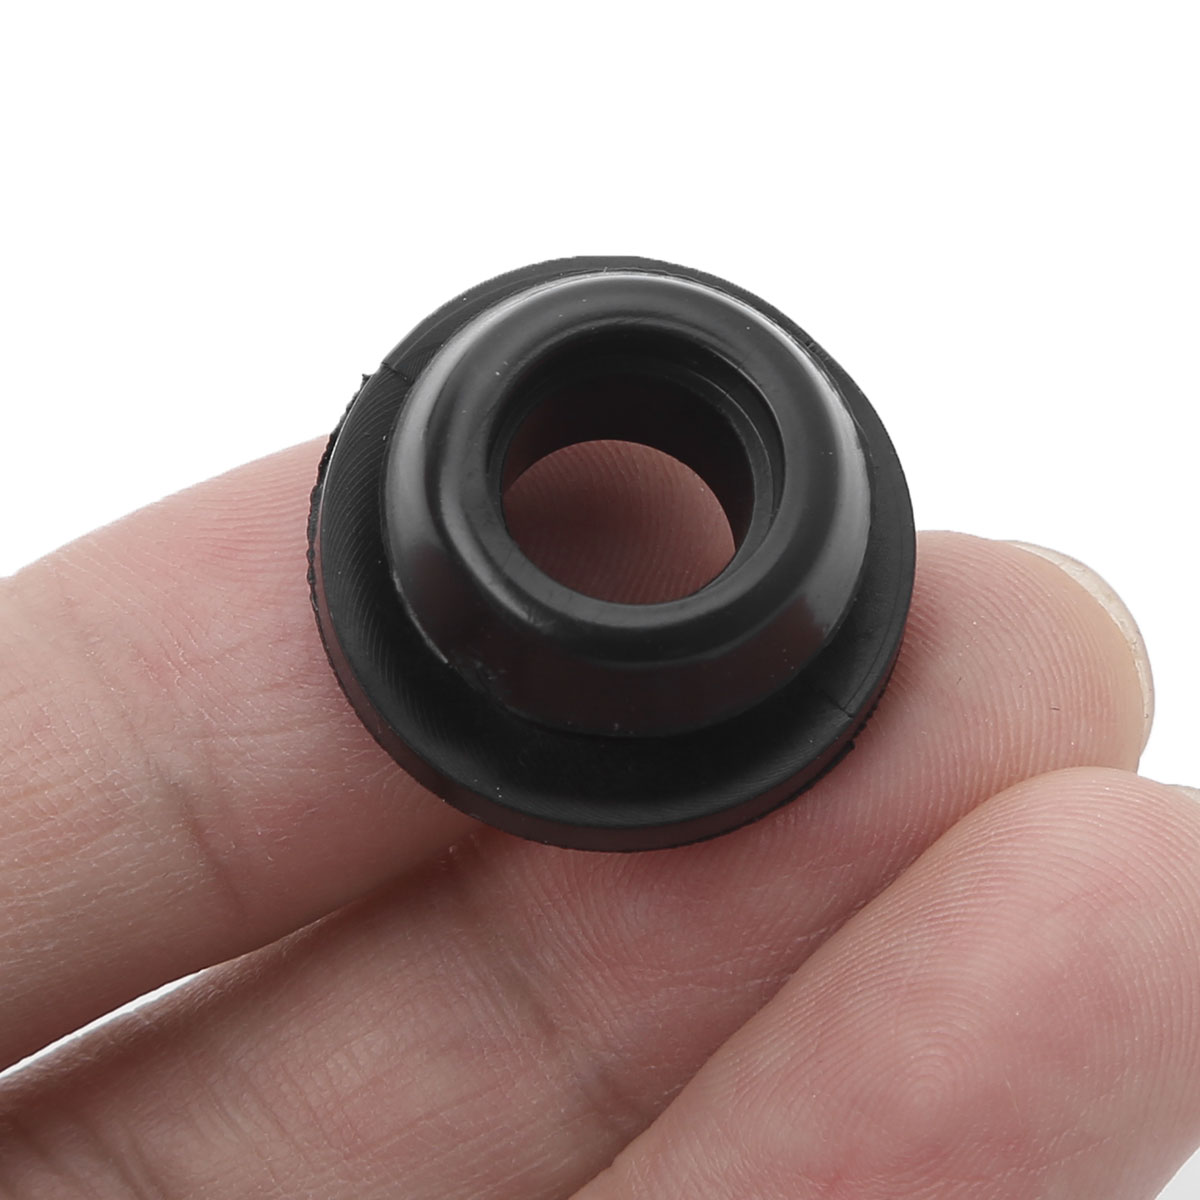 30Pcs 16mm Rubber Gaskets Seals Water Irrigation Pipe Fittings Anti-Aging Agricultural Irrigation Connectors Grooved Washer